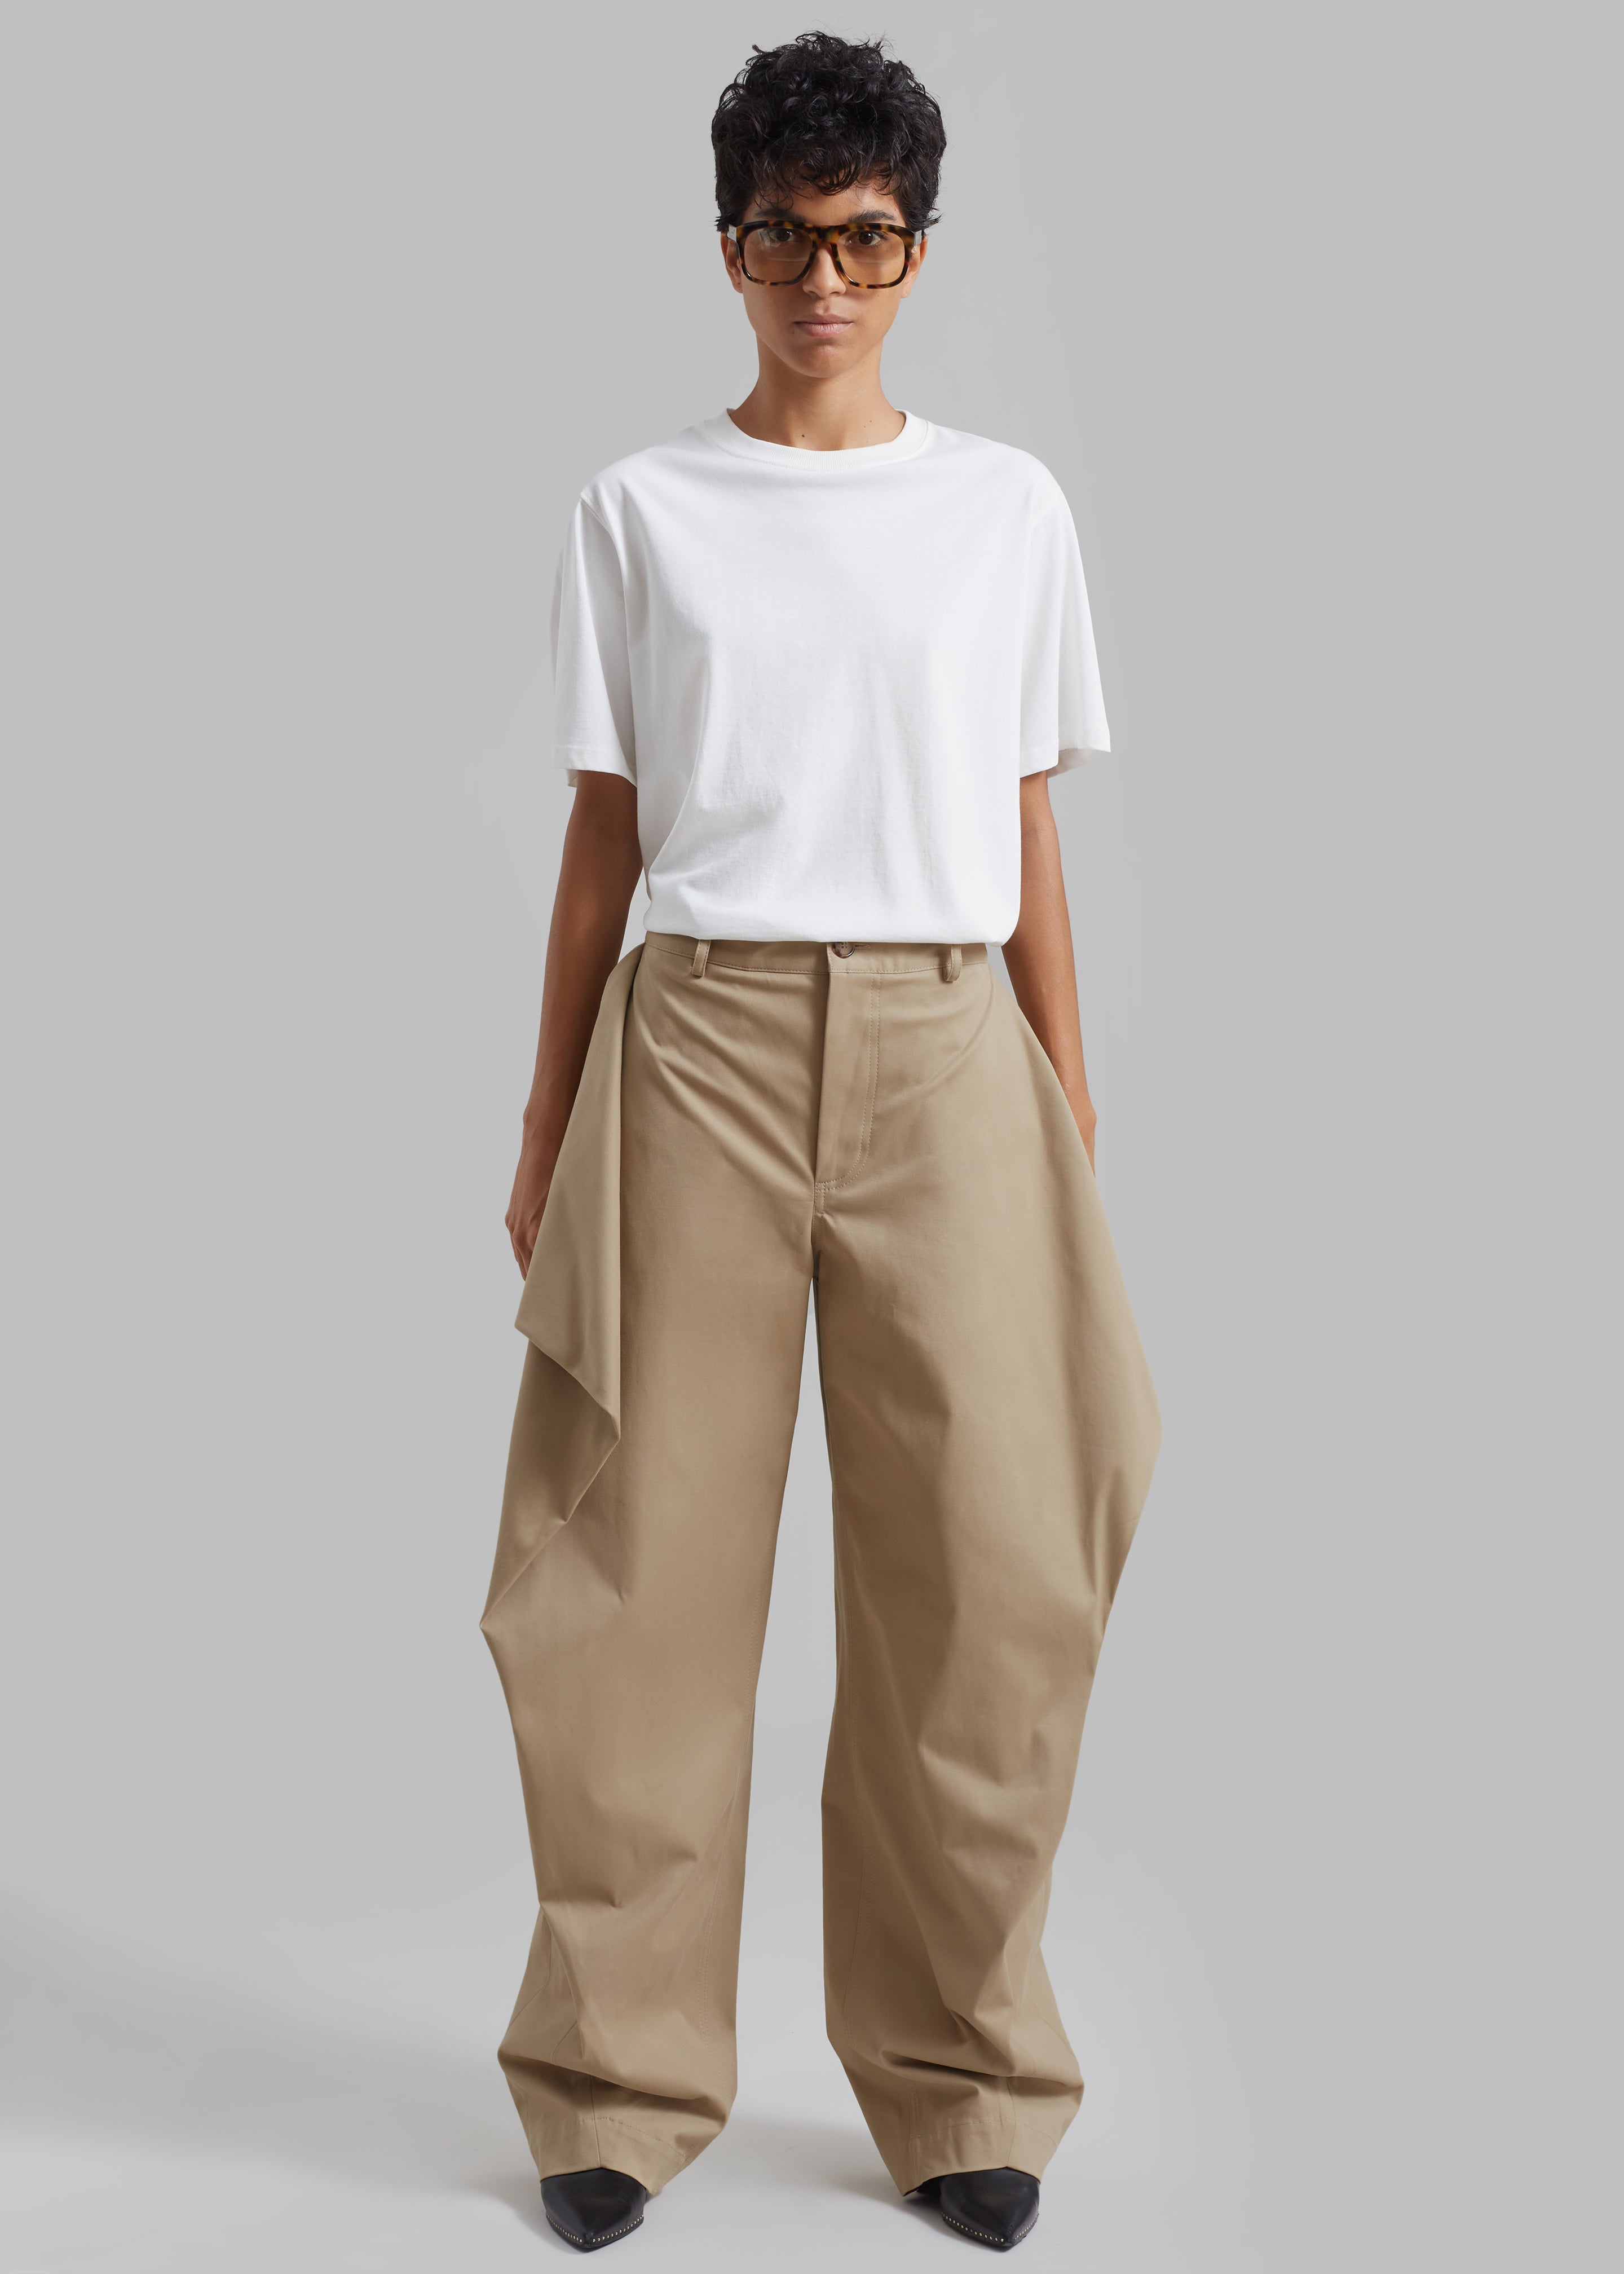 JW Anderson Kite Trousers - Flax - 5